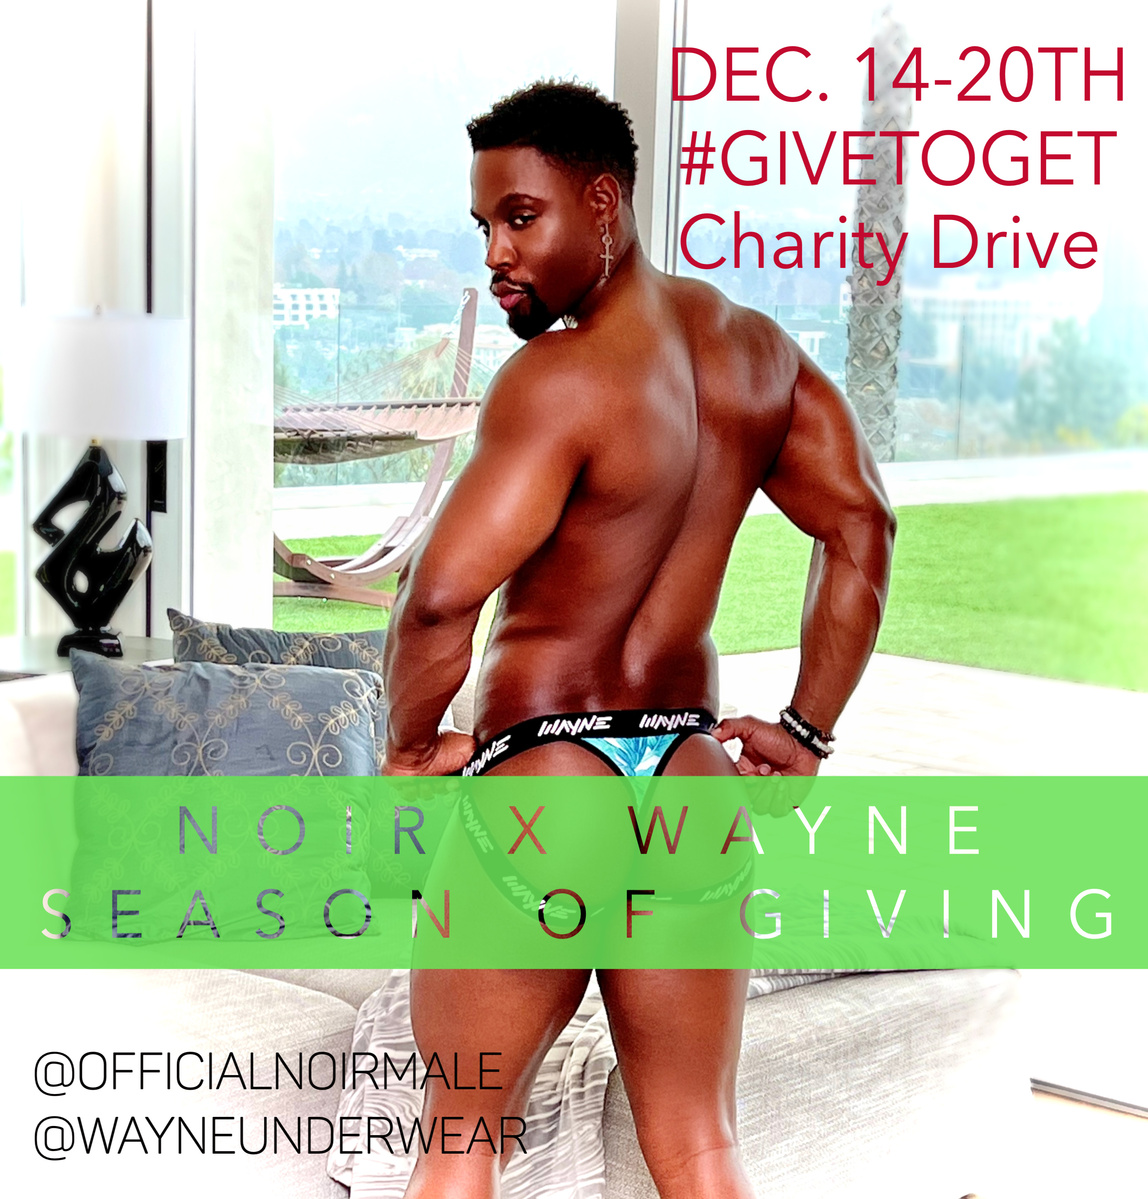 NOIR MALE & DESIGNER PERRY WAYNE SEASON OF GIVING BEGINS WITH JOINT CHARITY CAMPAIGN